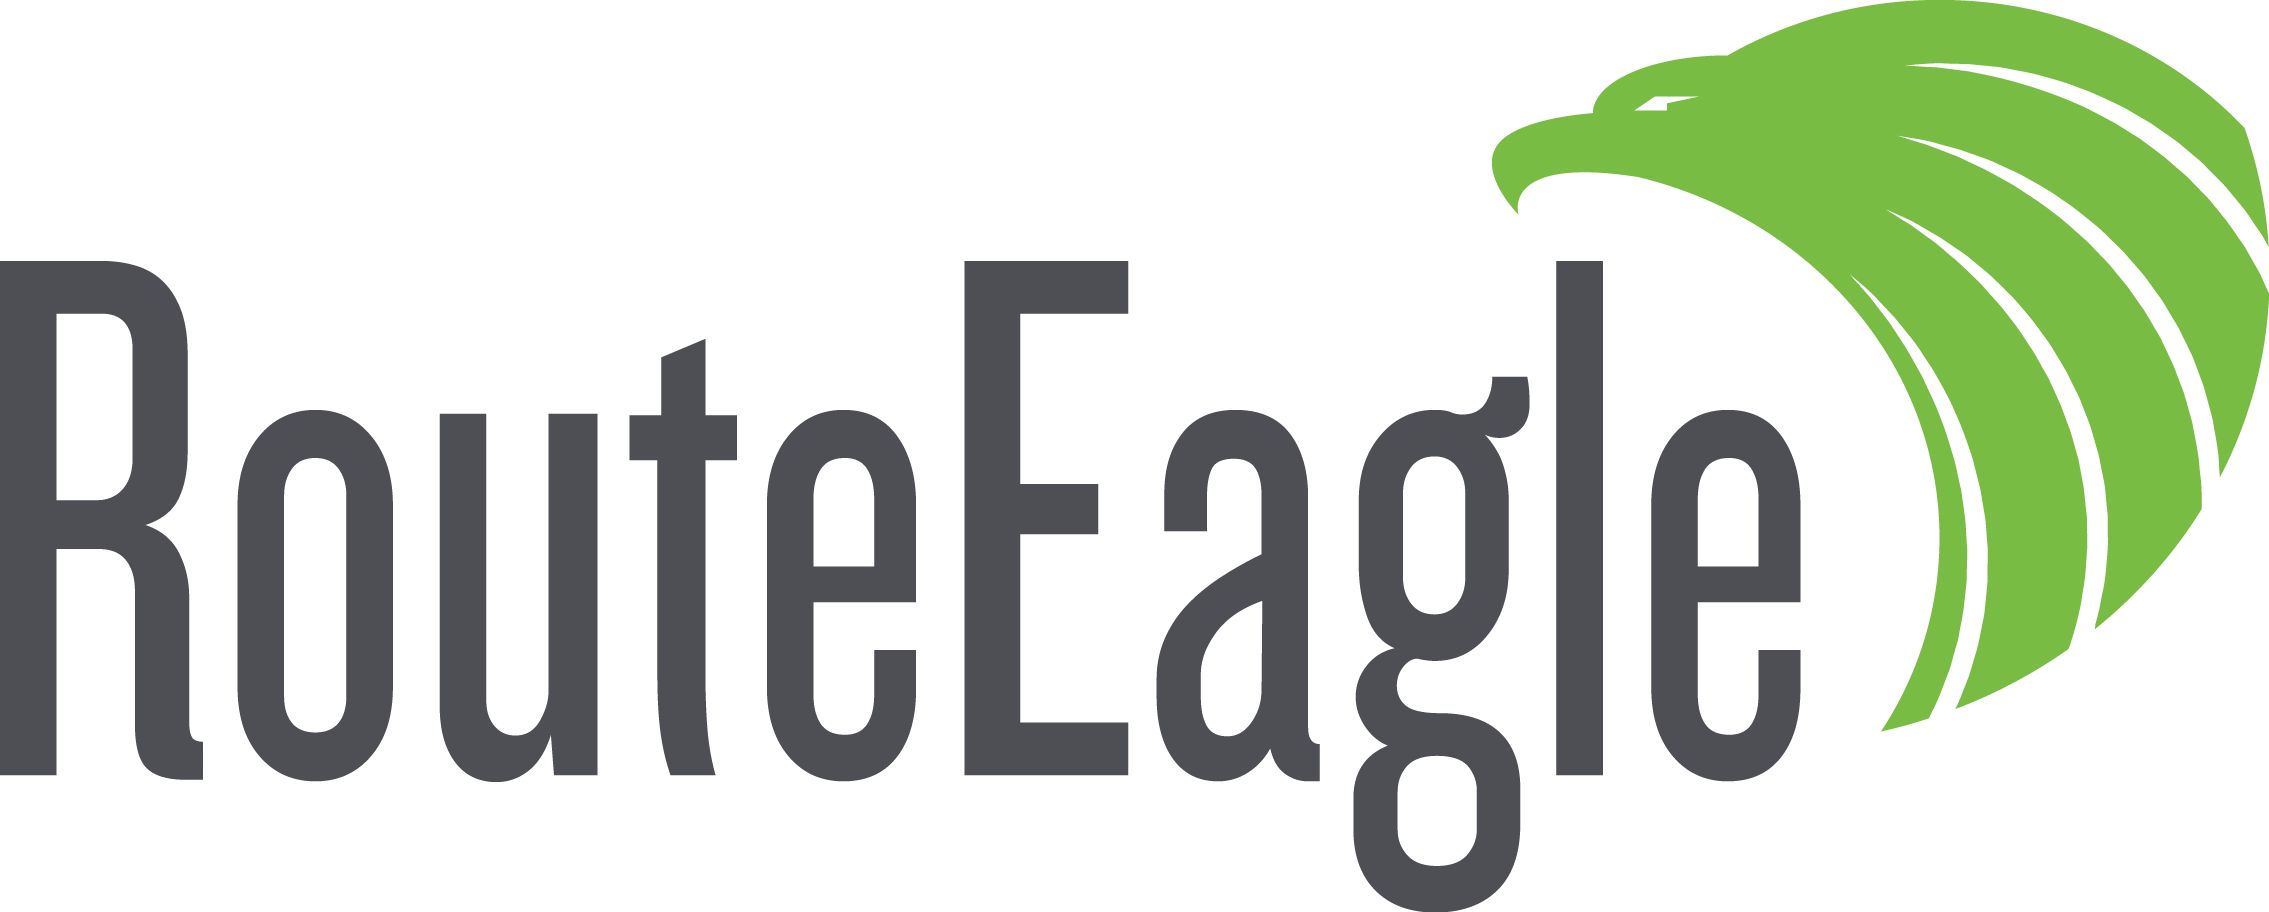 RRS RouteEagle set-out rate study logo